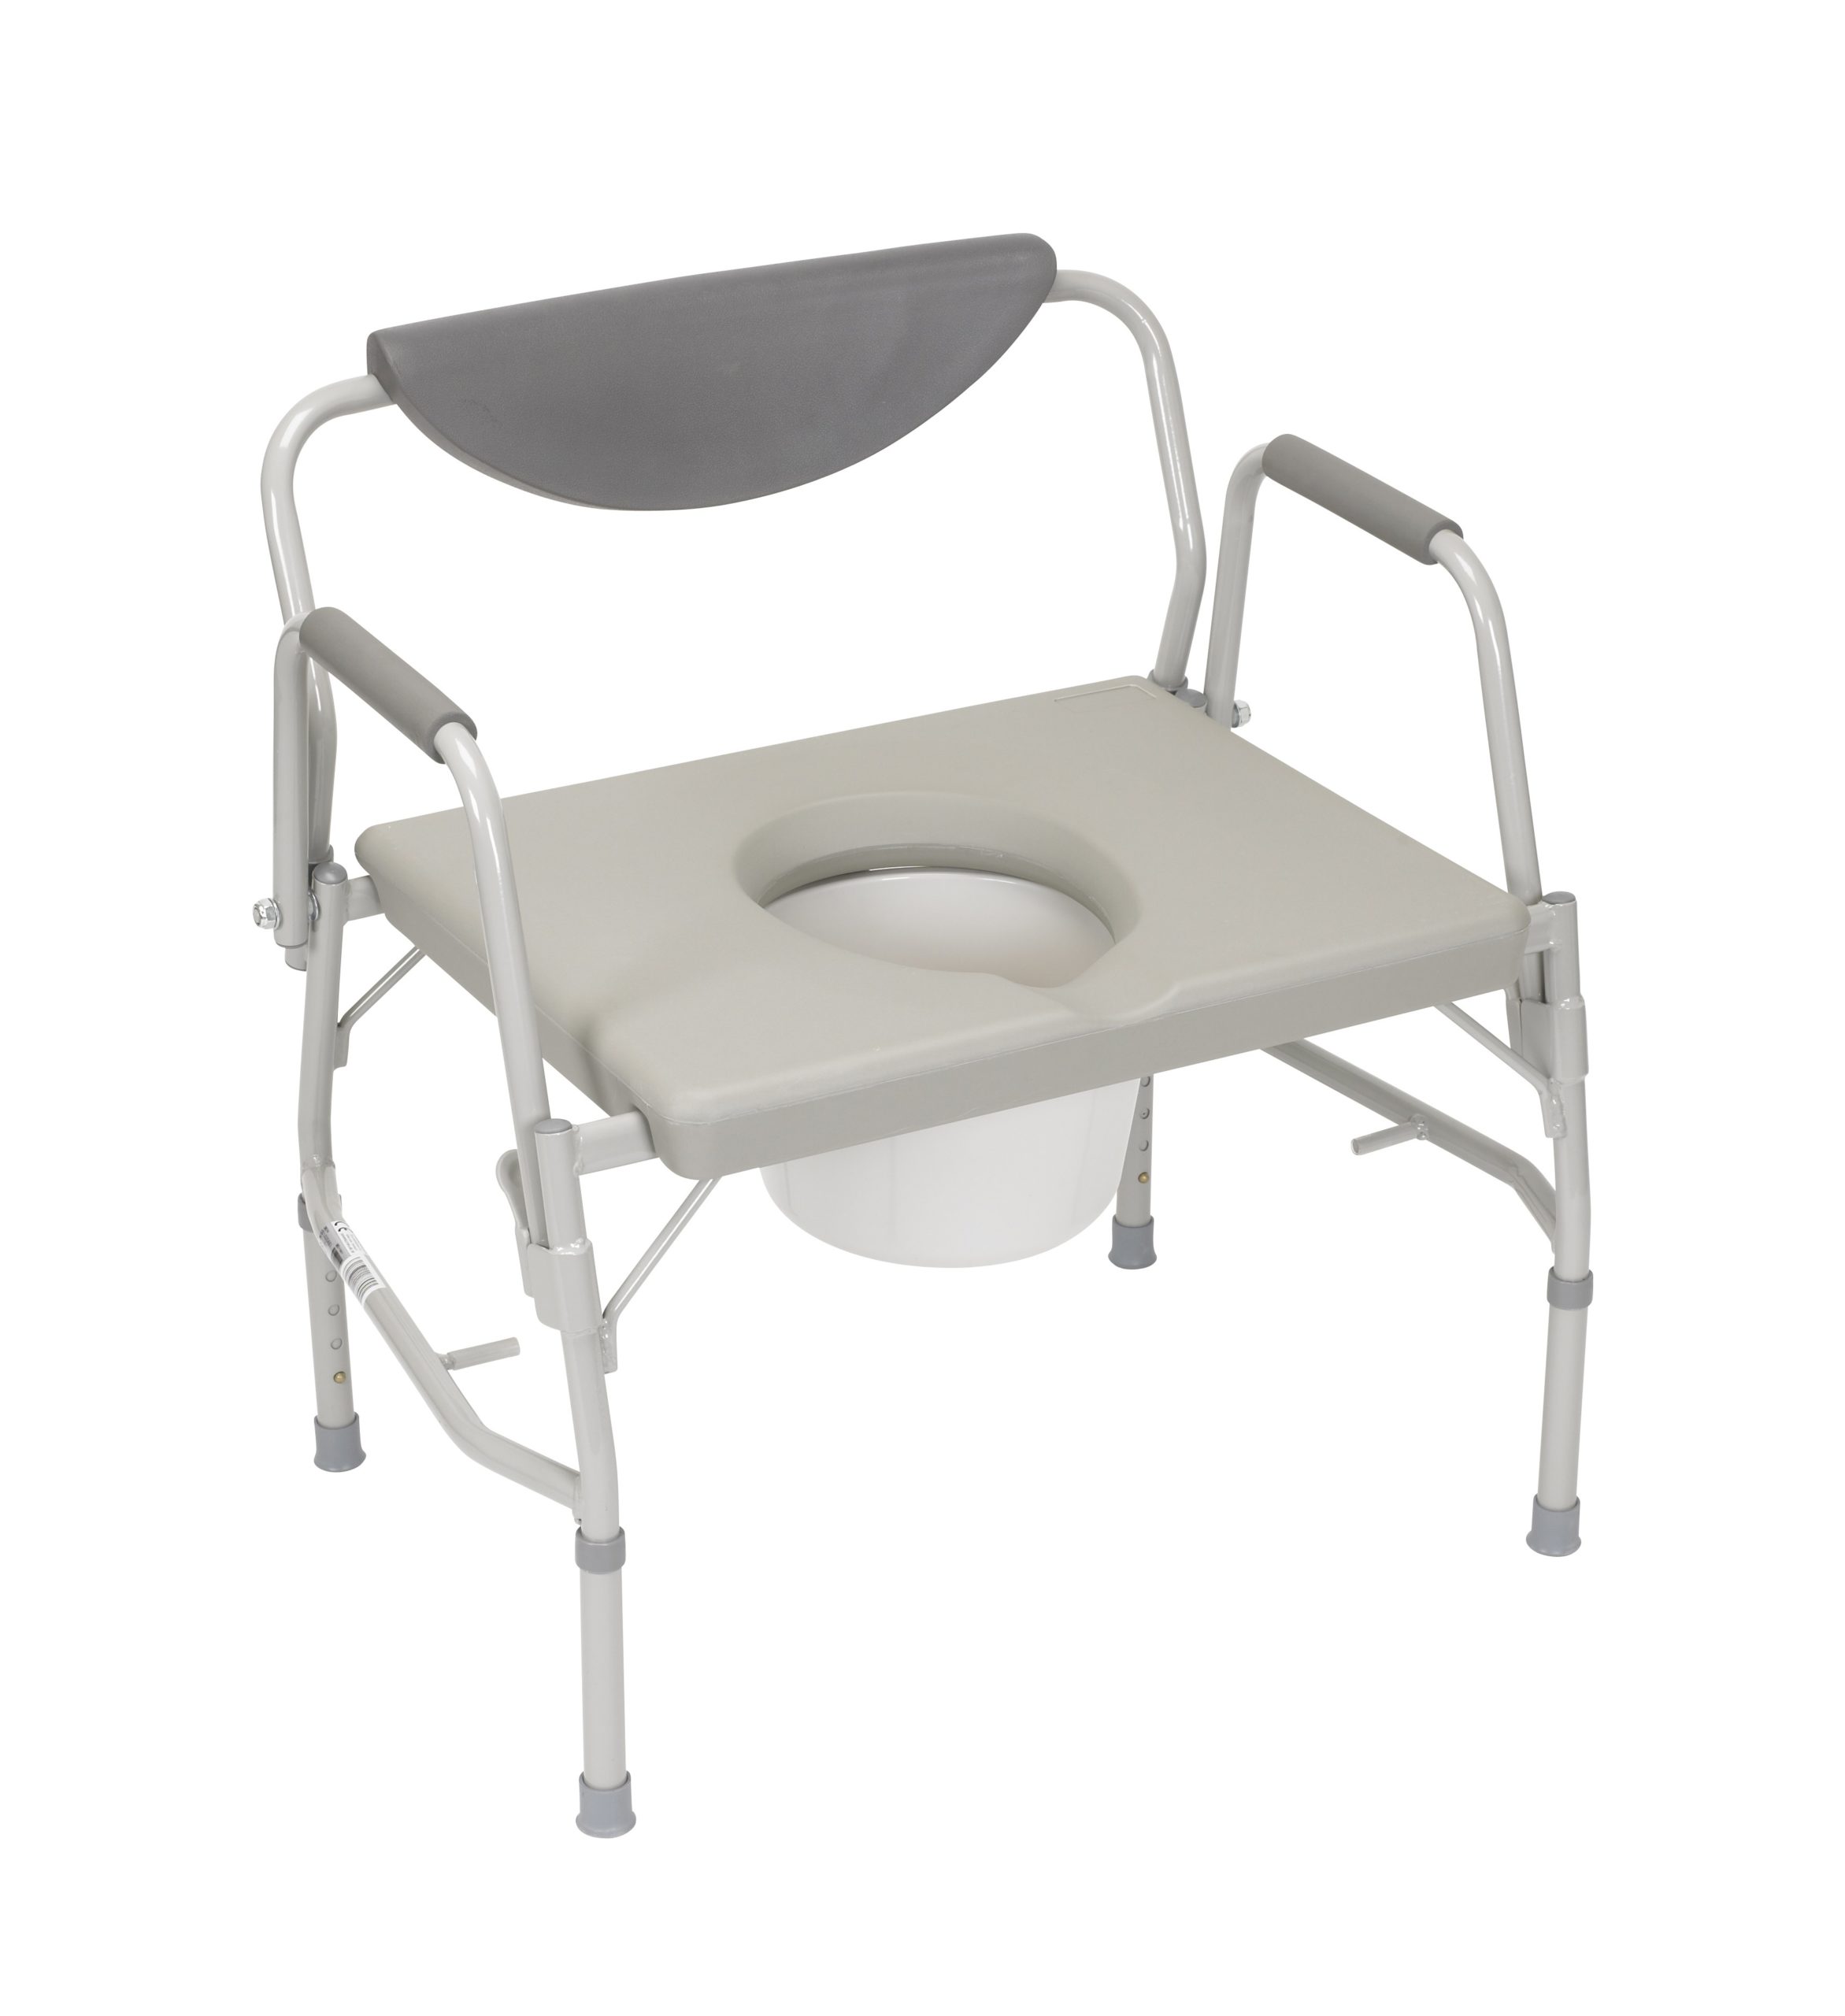 Bariatric Drop Arm Bedside Commode Chair Bariatric Bathroom Products Bariatric Products Hmebc